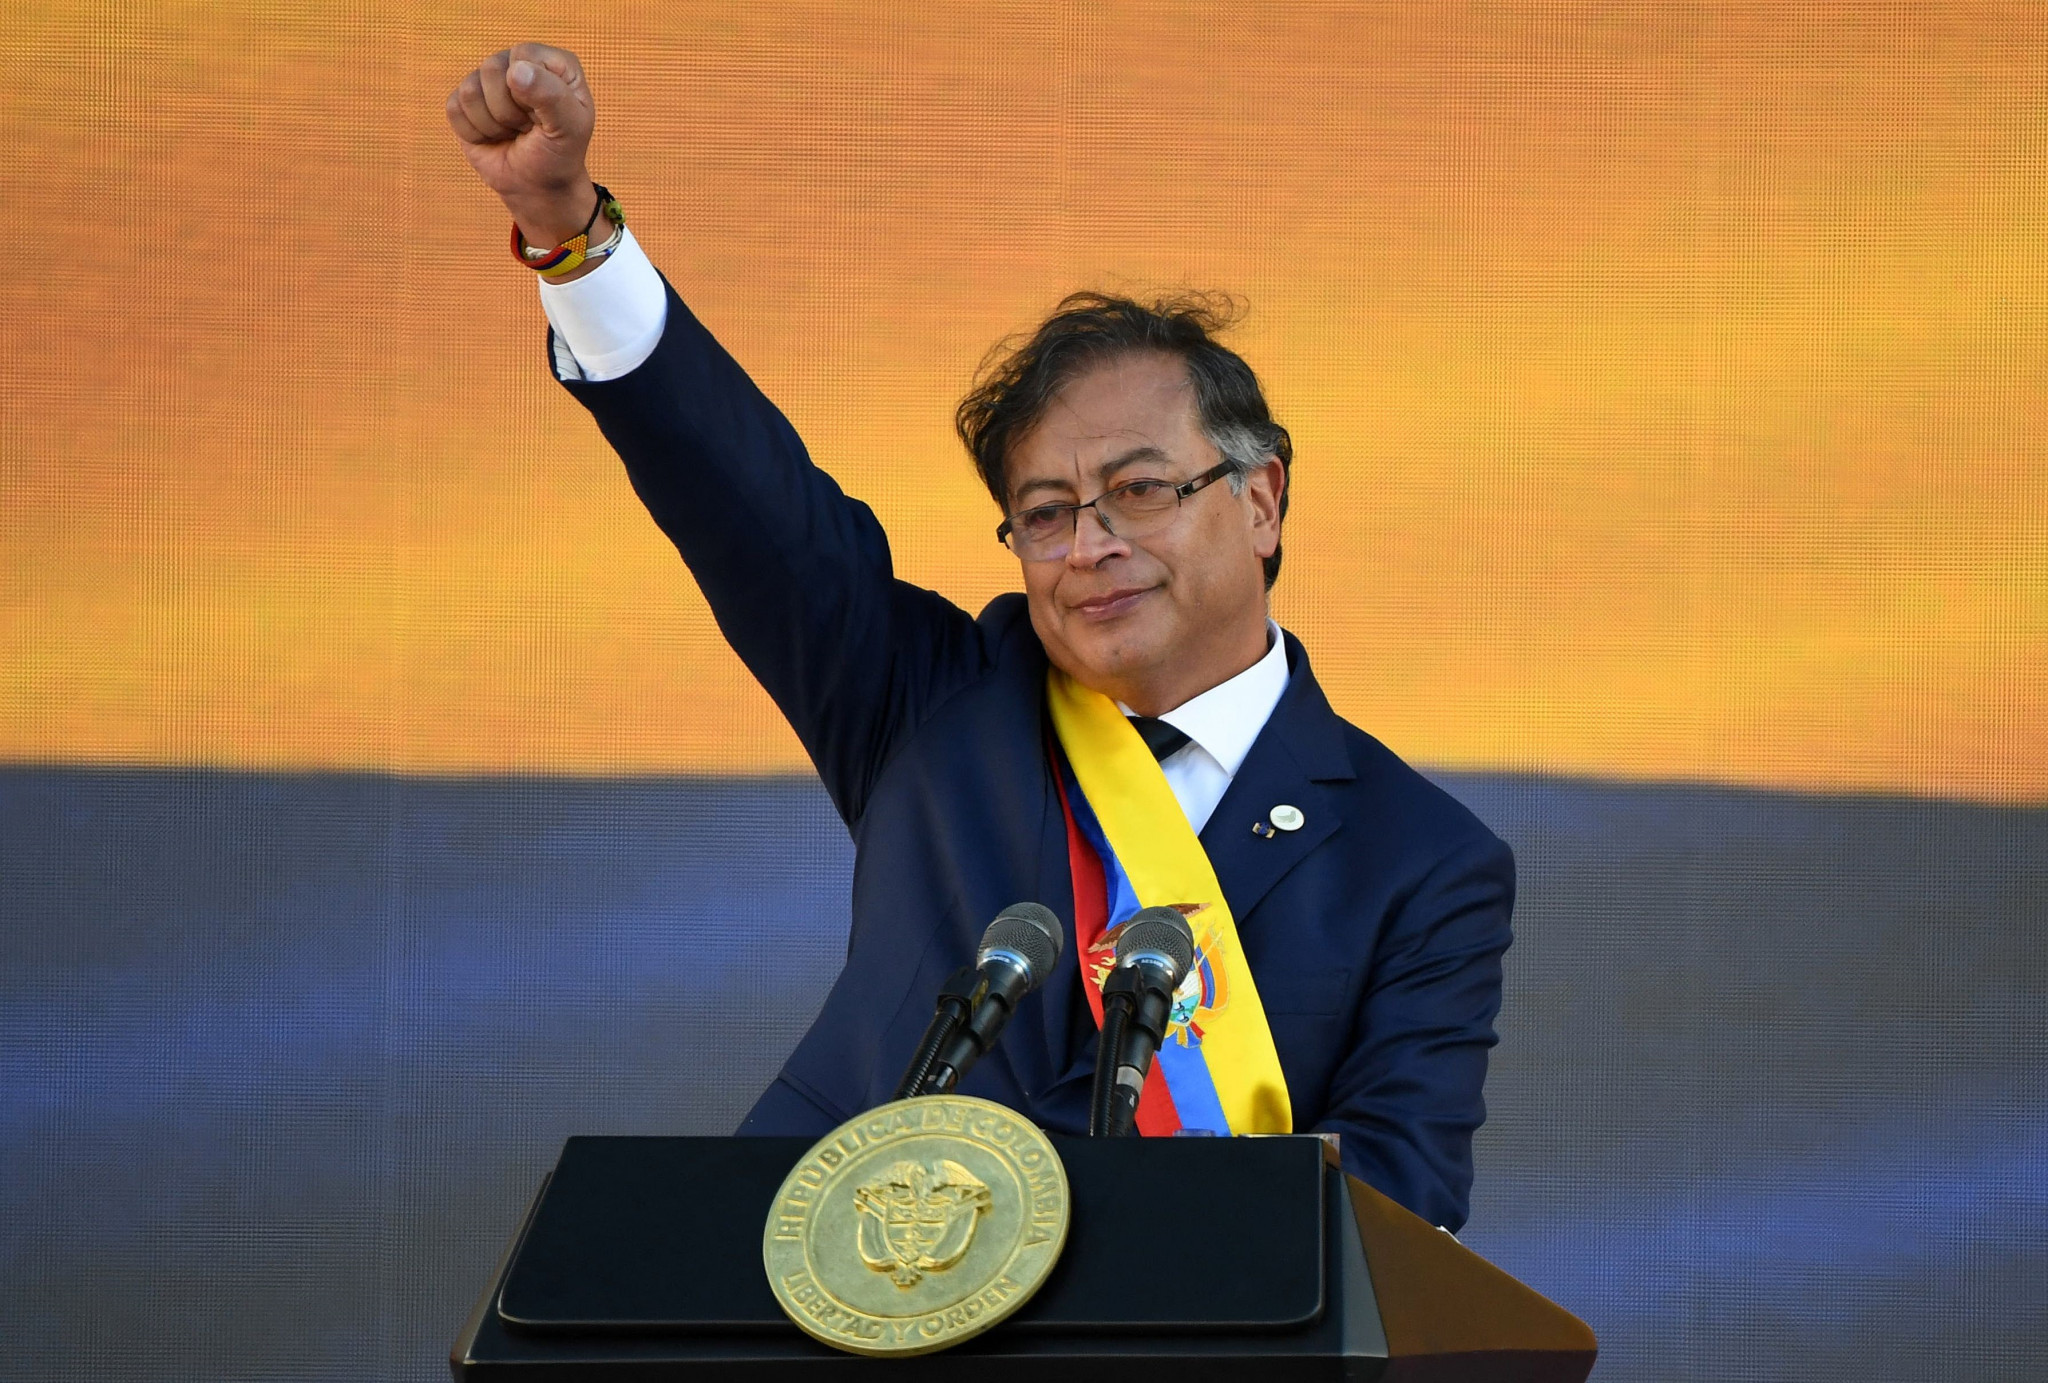 Gustavo Petro has recently been inaugurated as President of Colombia following his election on a four-year term ©Getty Images